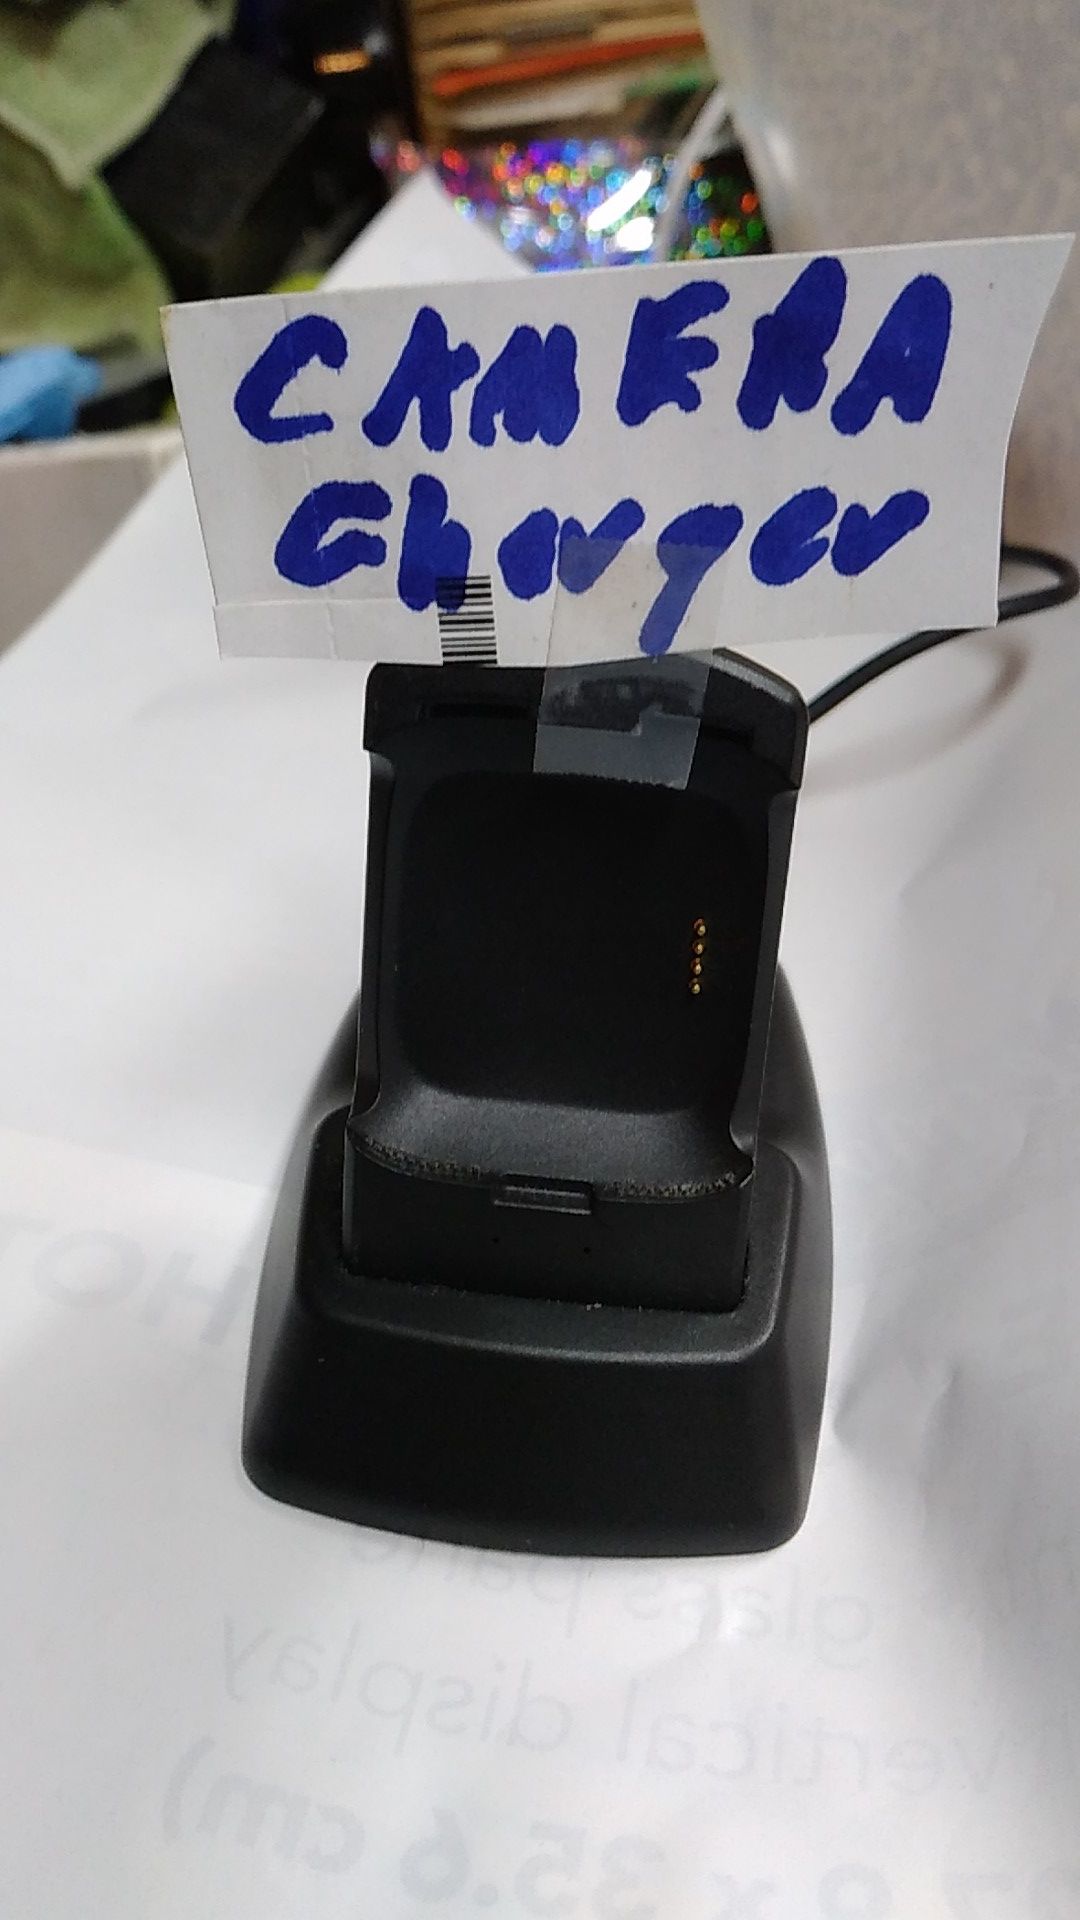 Camera battery charger